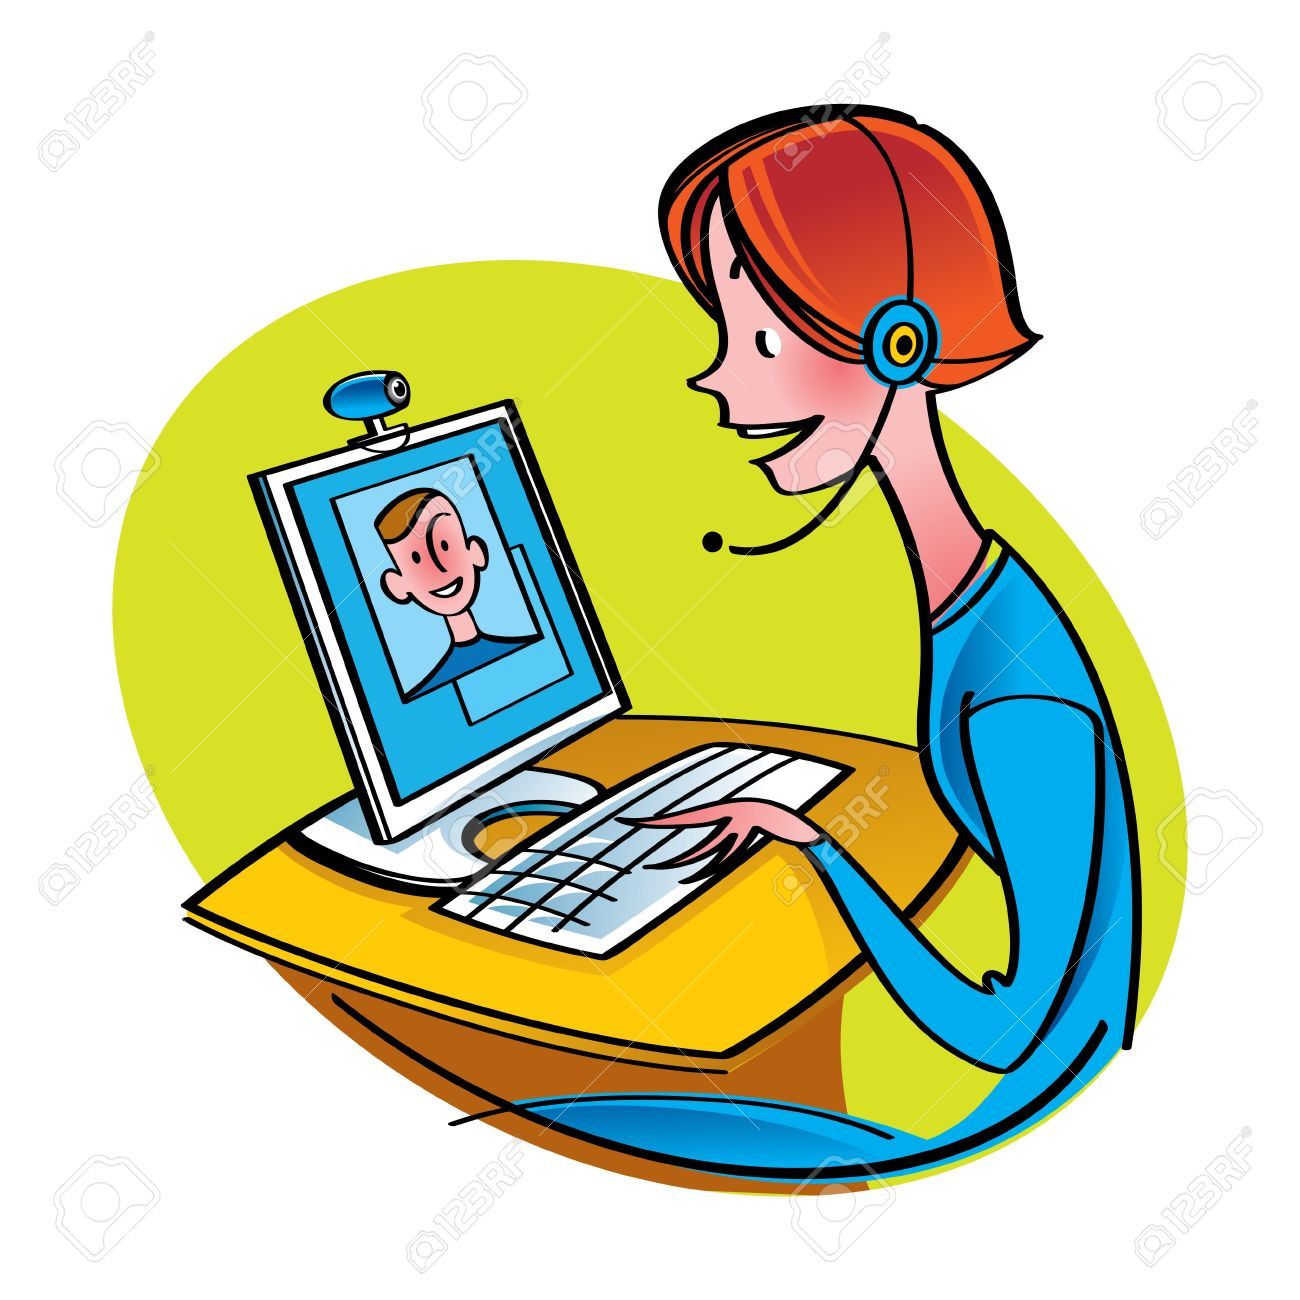 Chatting online clipart.